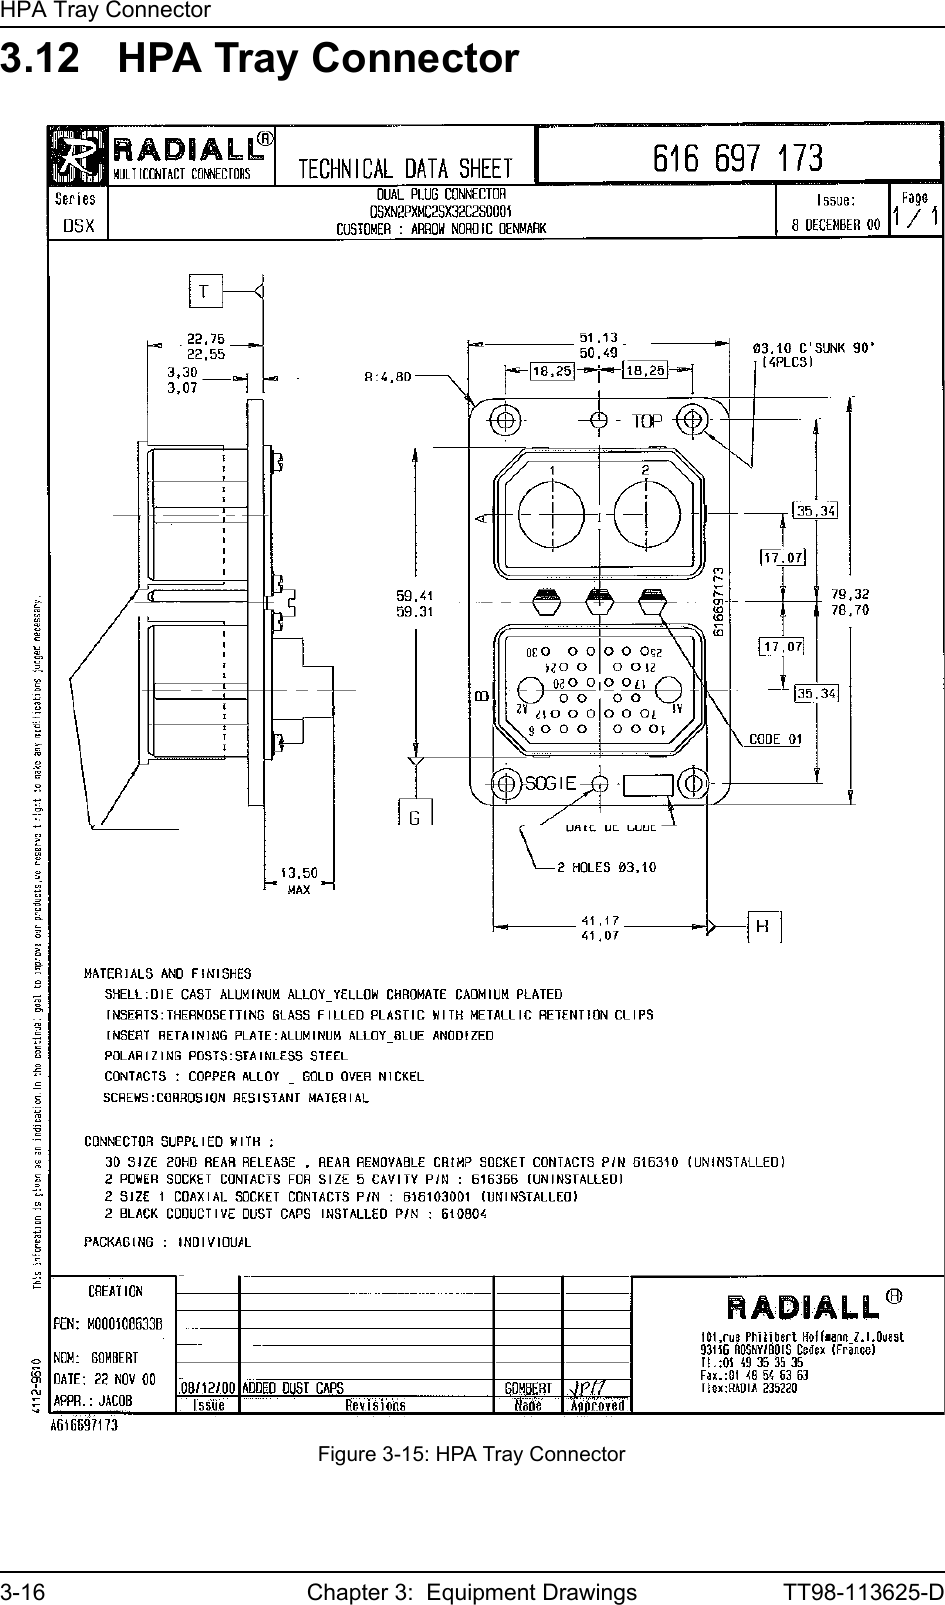 HPA Tray Connector3-16 Chapter 3:  Equipment Drawings TT98-113625-D3.12 HPA Tray ConnectorFigure 3-15: HPA Tray Connector